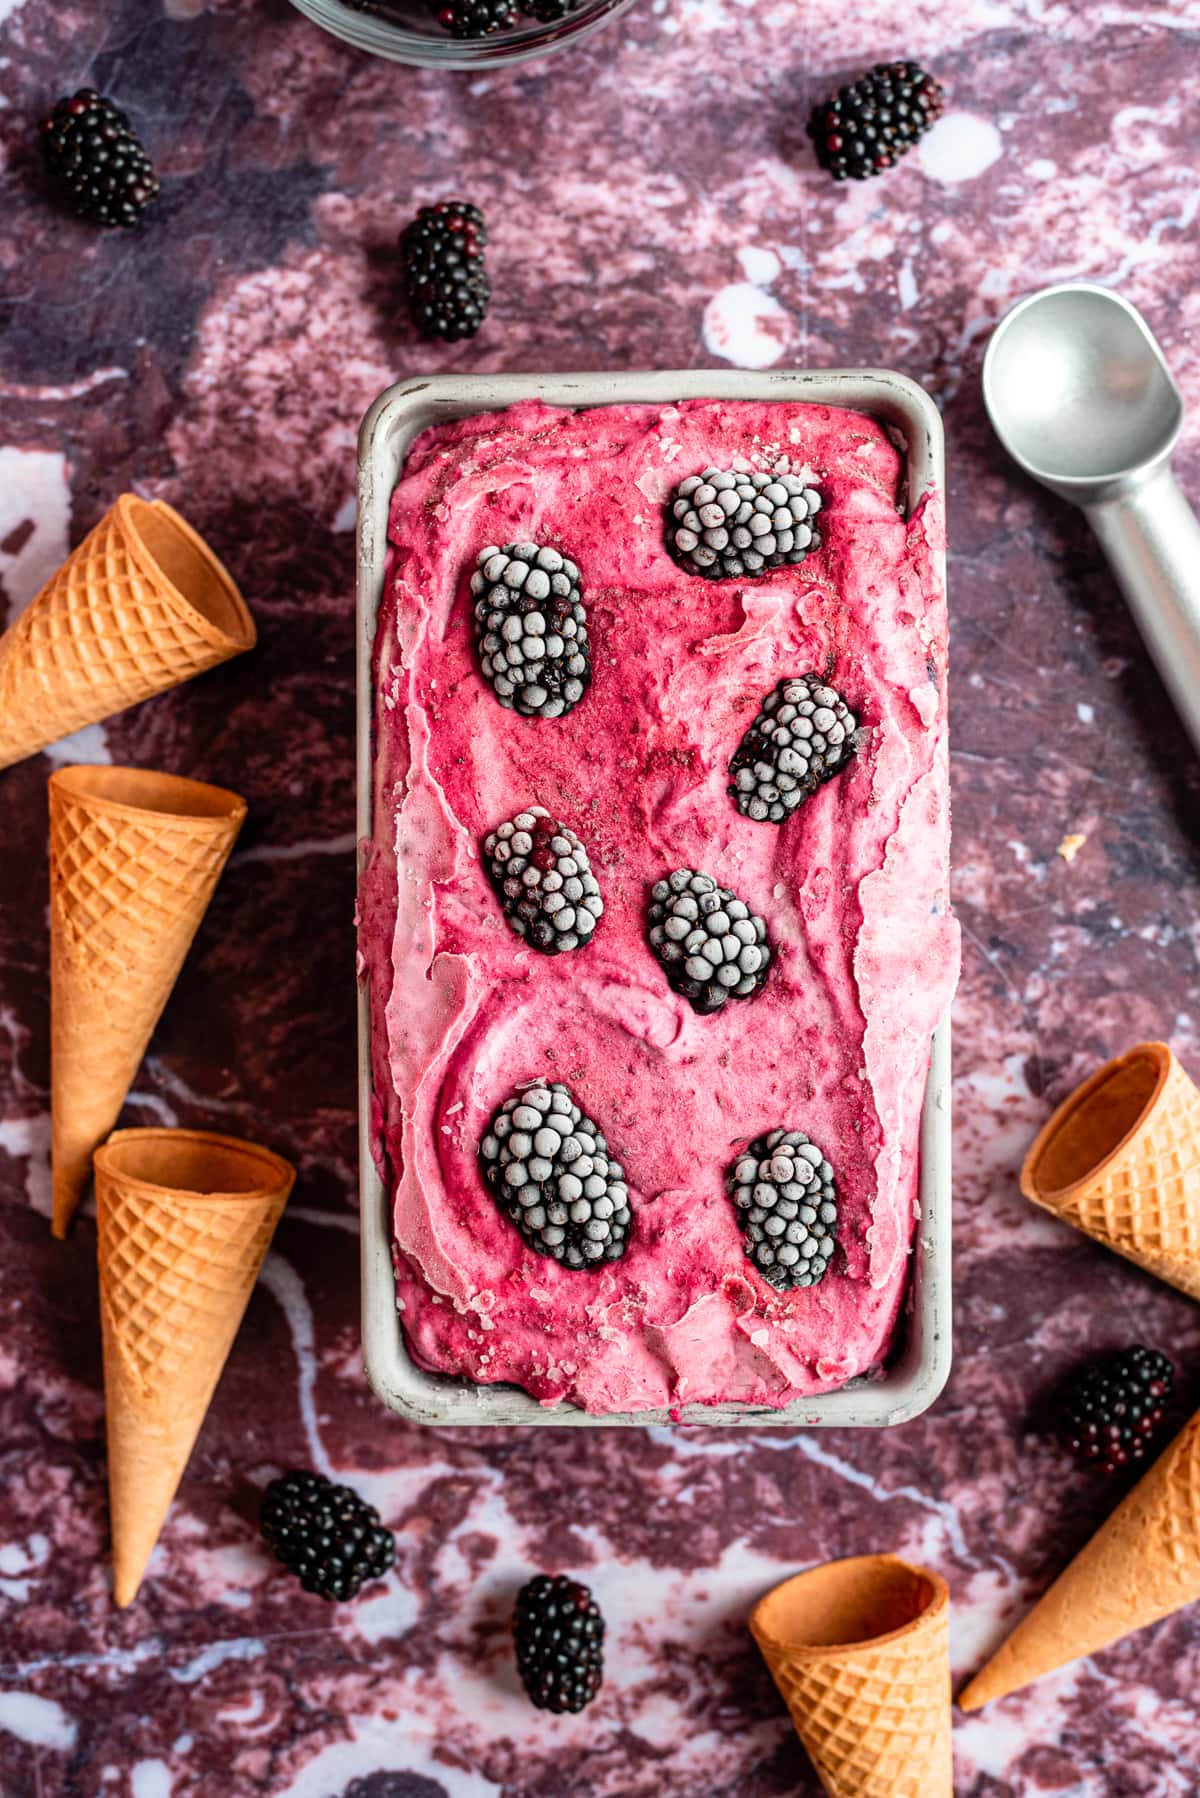 The frozen blackberry ice cream right out of the freezer with ice cream cones on both sides.